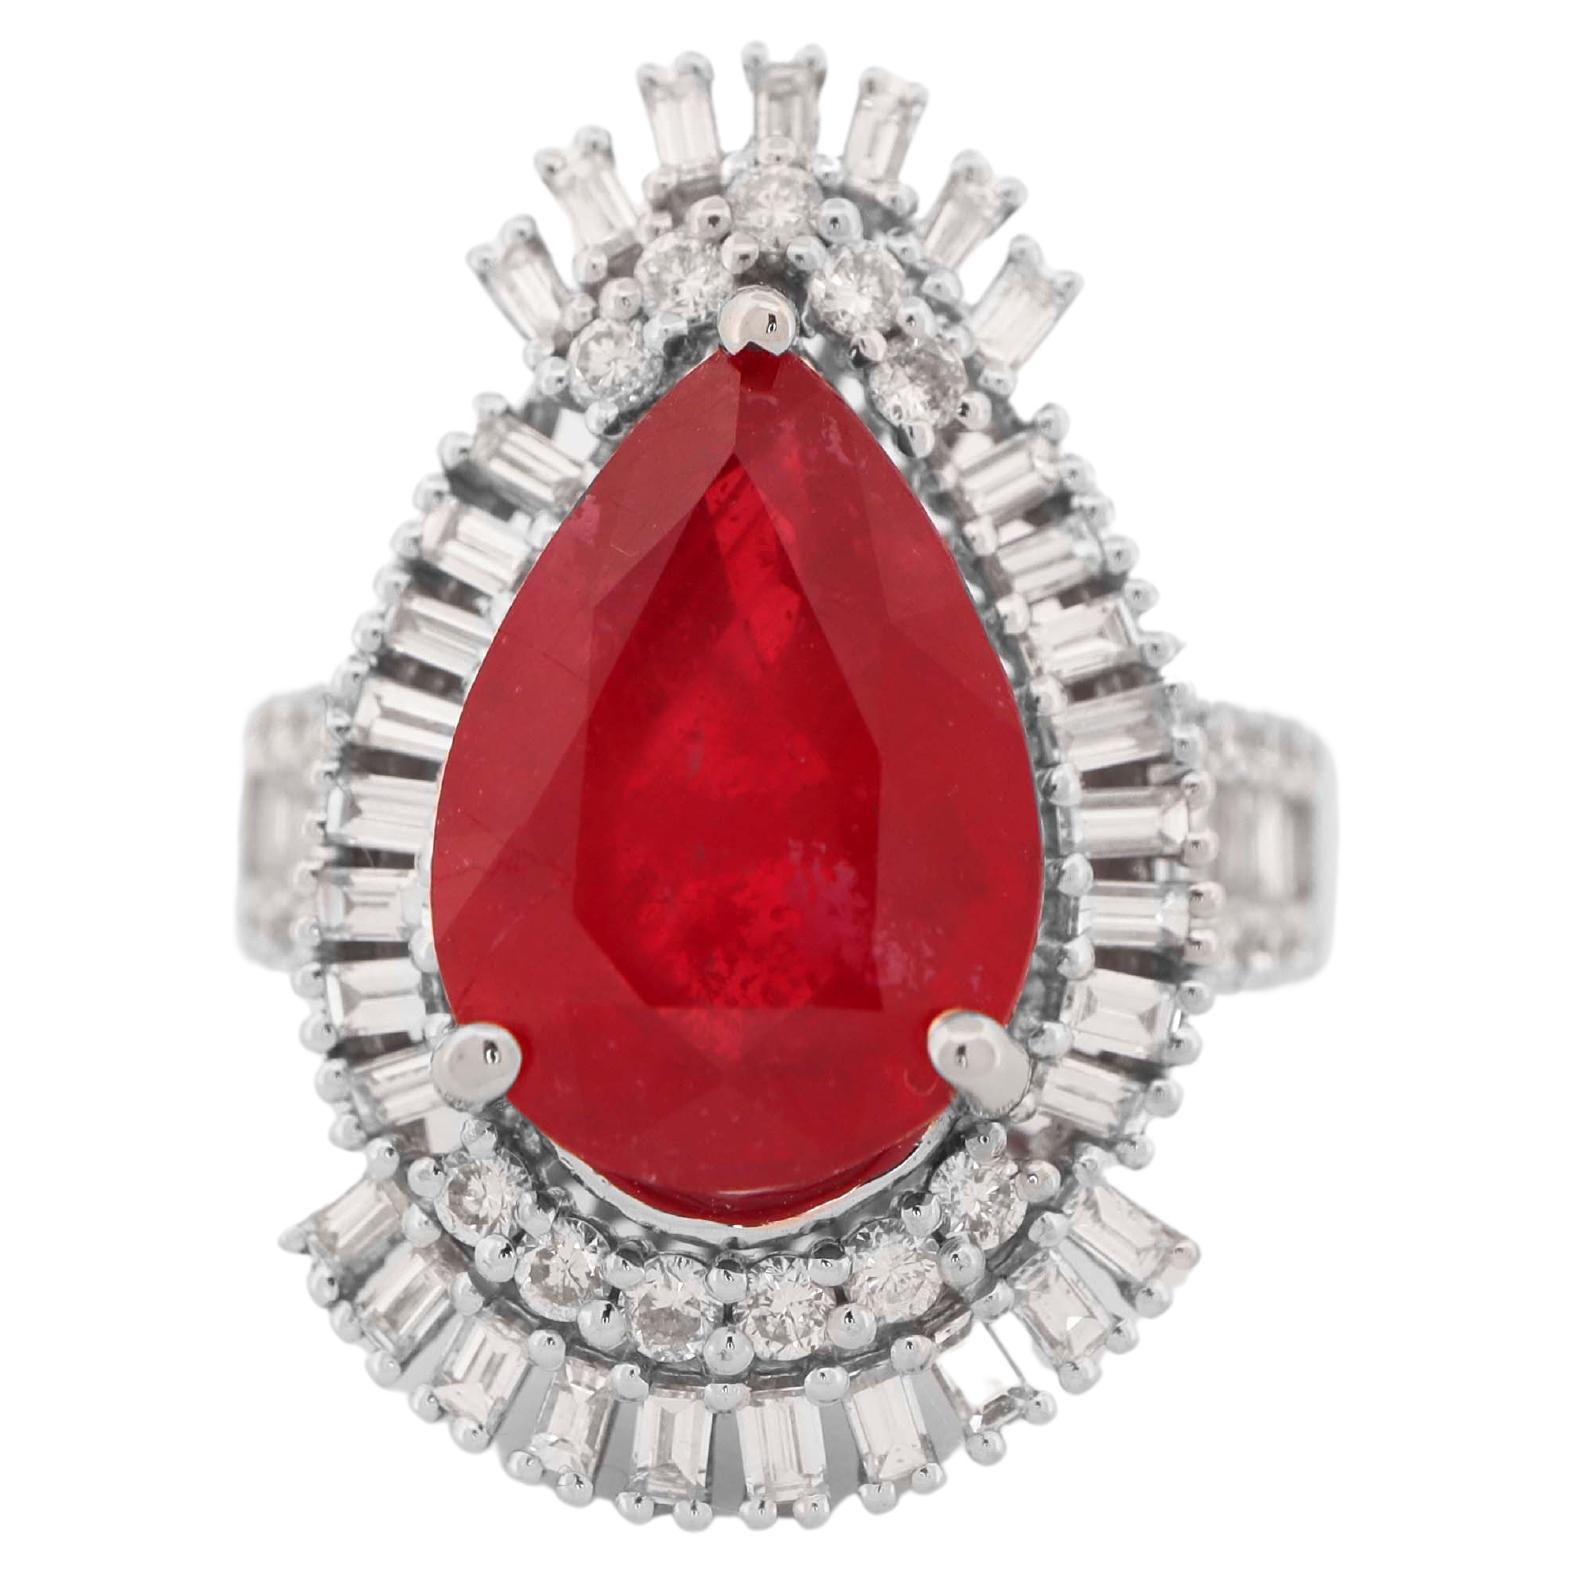 6.95 Carat Pear Shaped Ruby and Diamond Ring